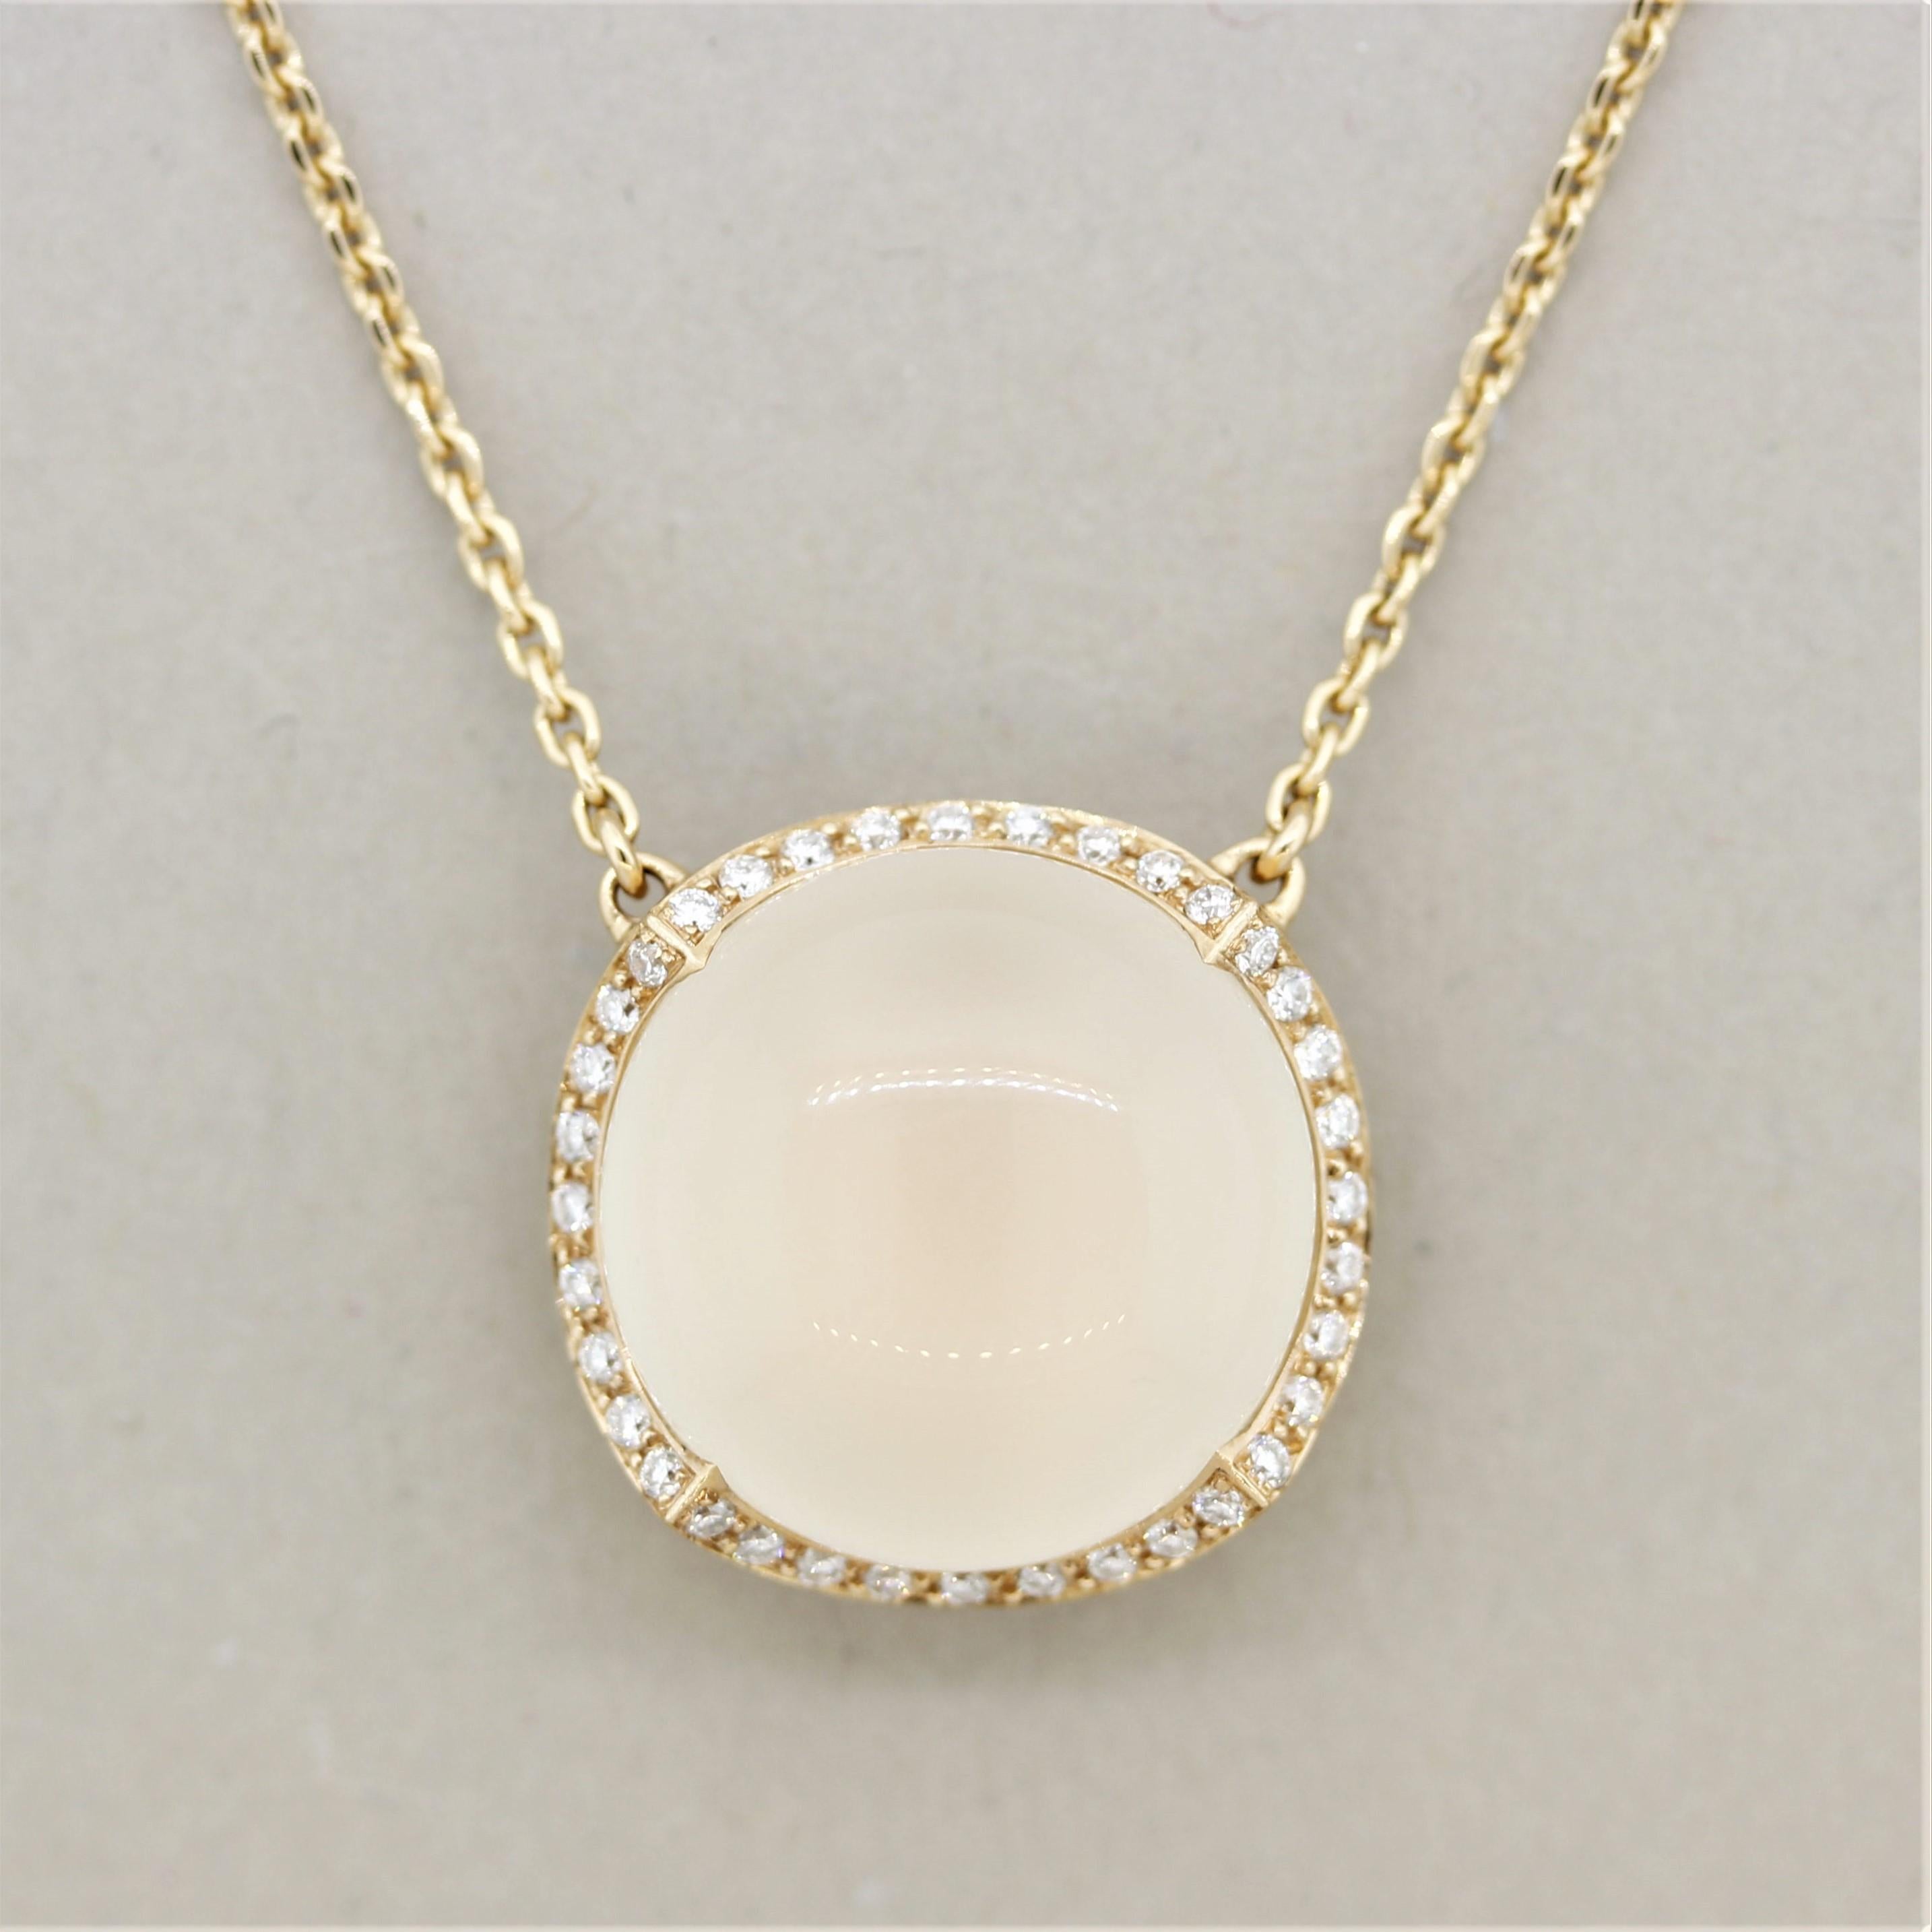 A classy and elegant necklace featuring a 14.97 carat moonstone. It has a lovely cream color with excellent luster as light rolls across the stone. It is accented by a halo of round brilliant-cut diamonds weighing 0.28 carats which add sparkle and